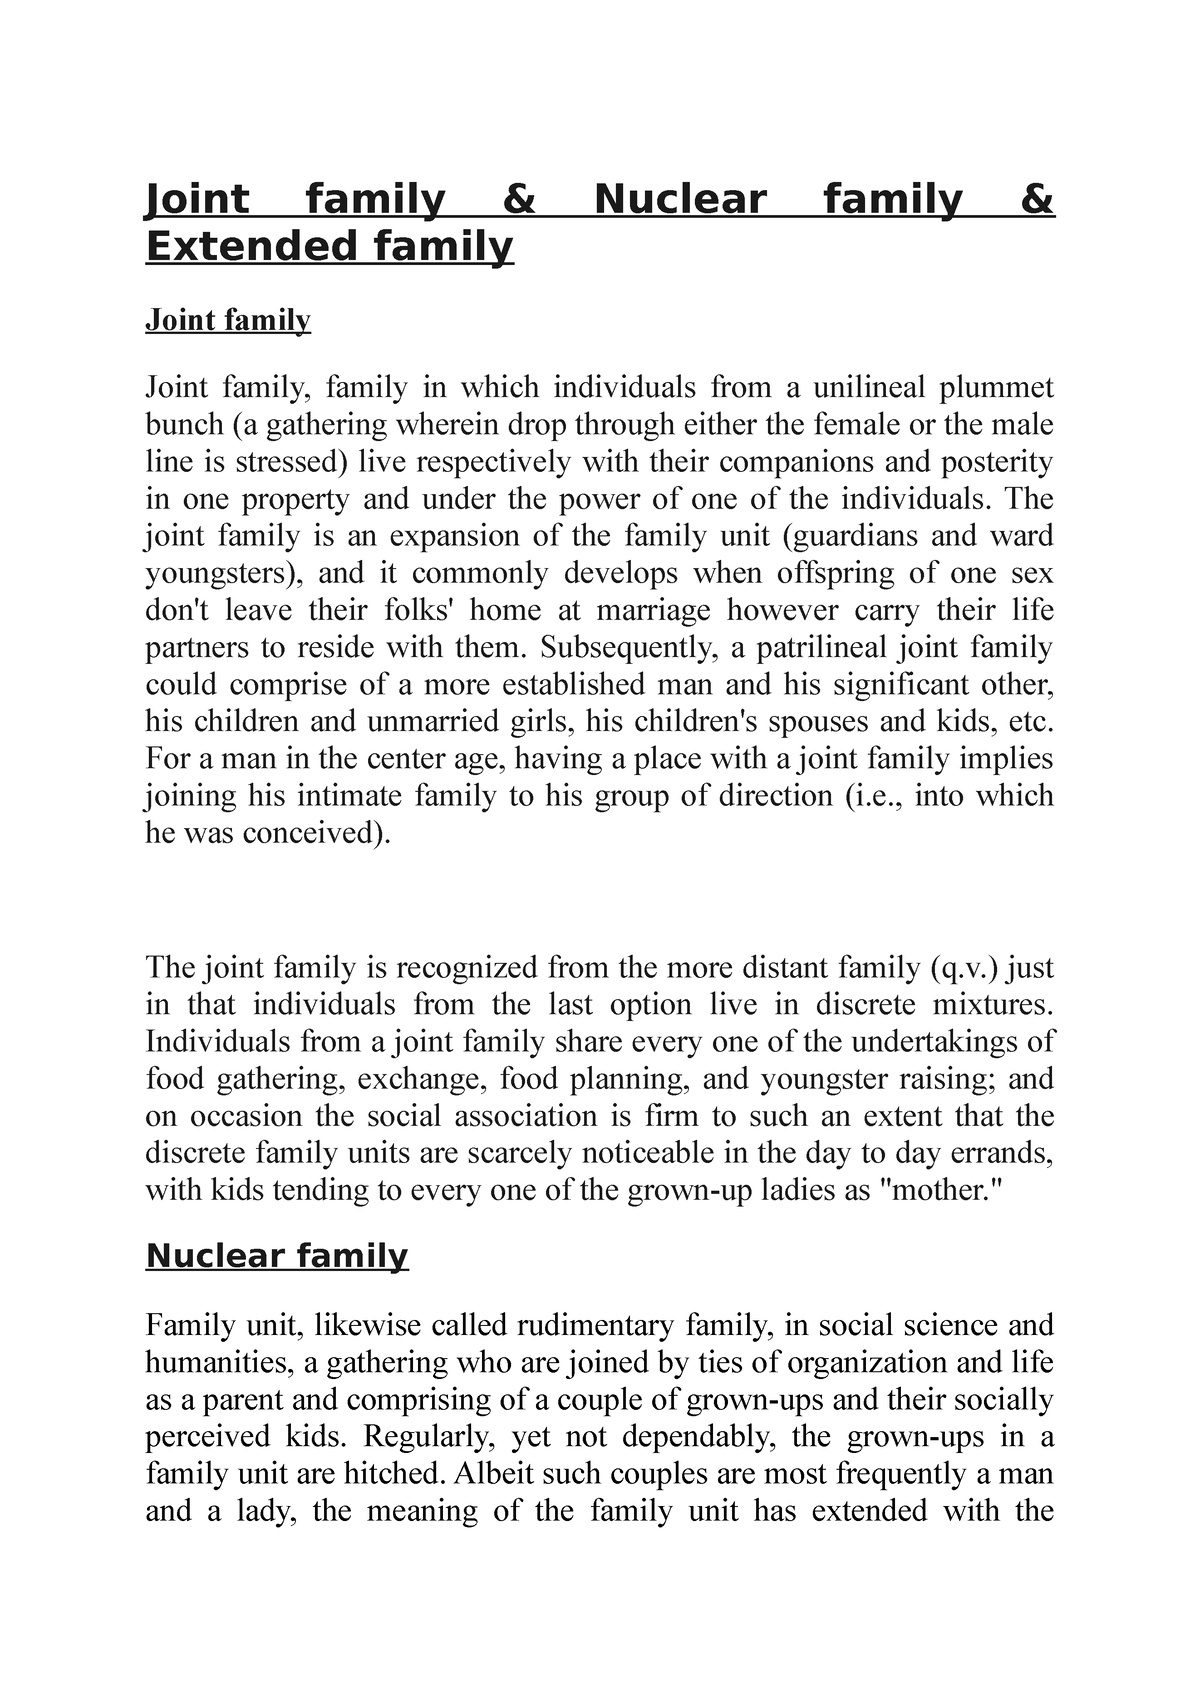 essay on nuclear family and joint family